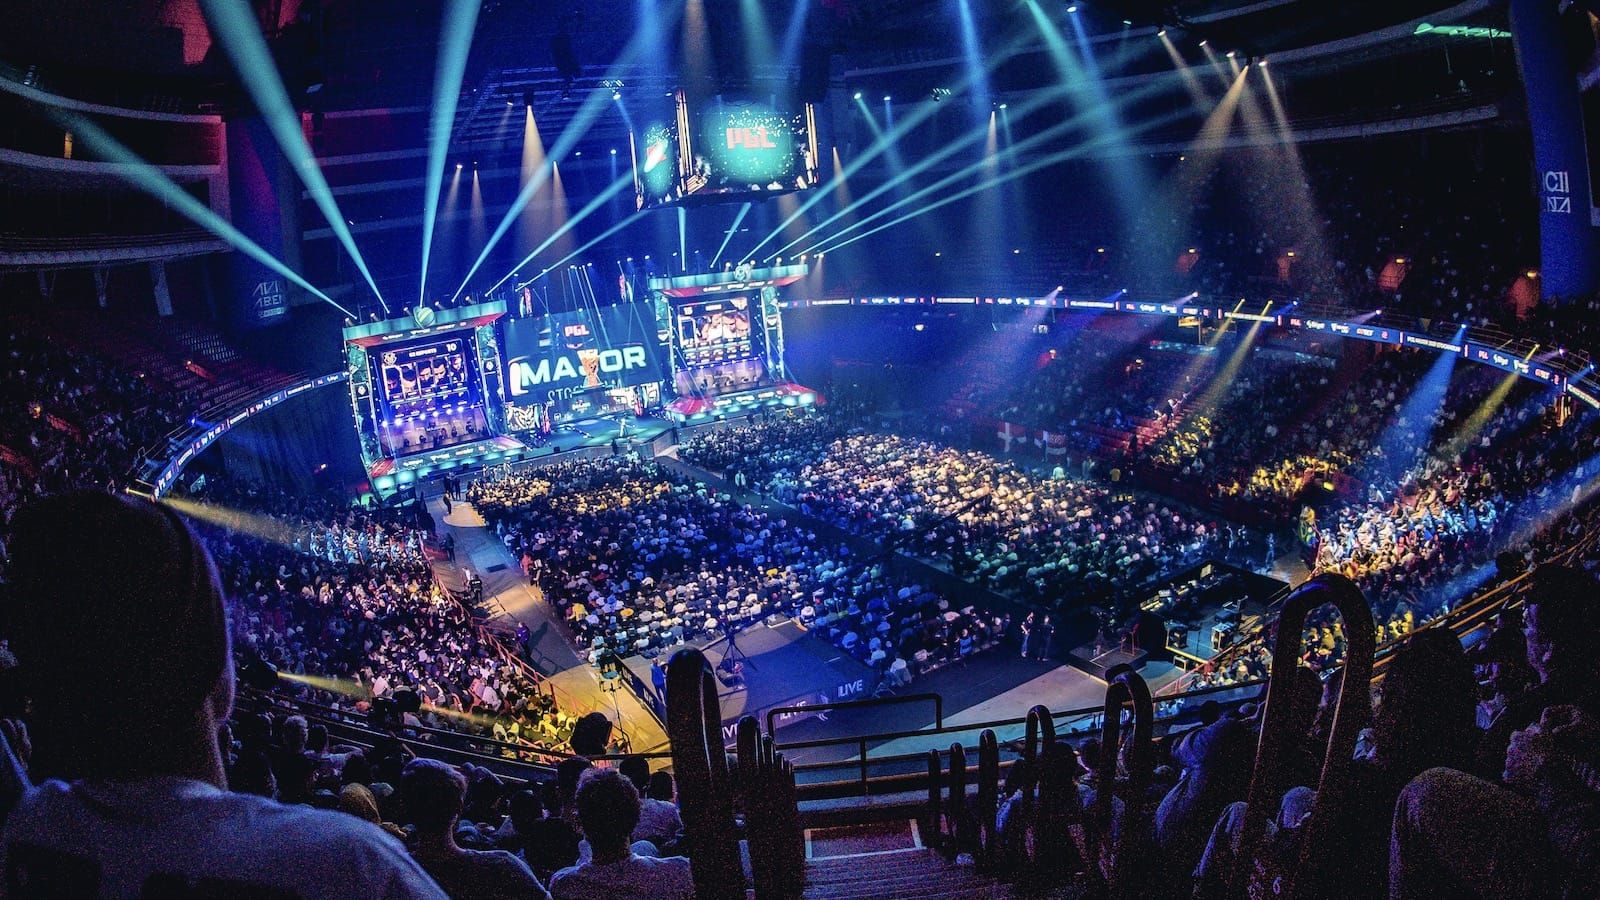 Overhead view of stage at PGL Major from the top rows of the arena